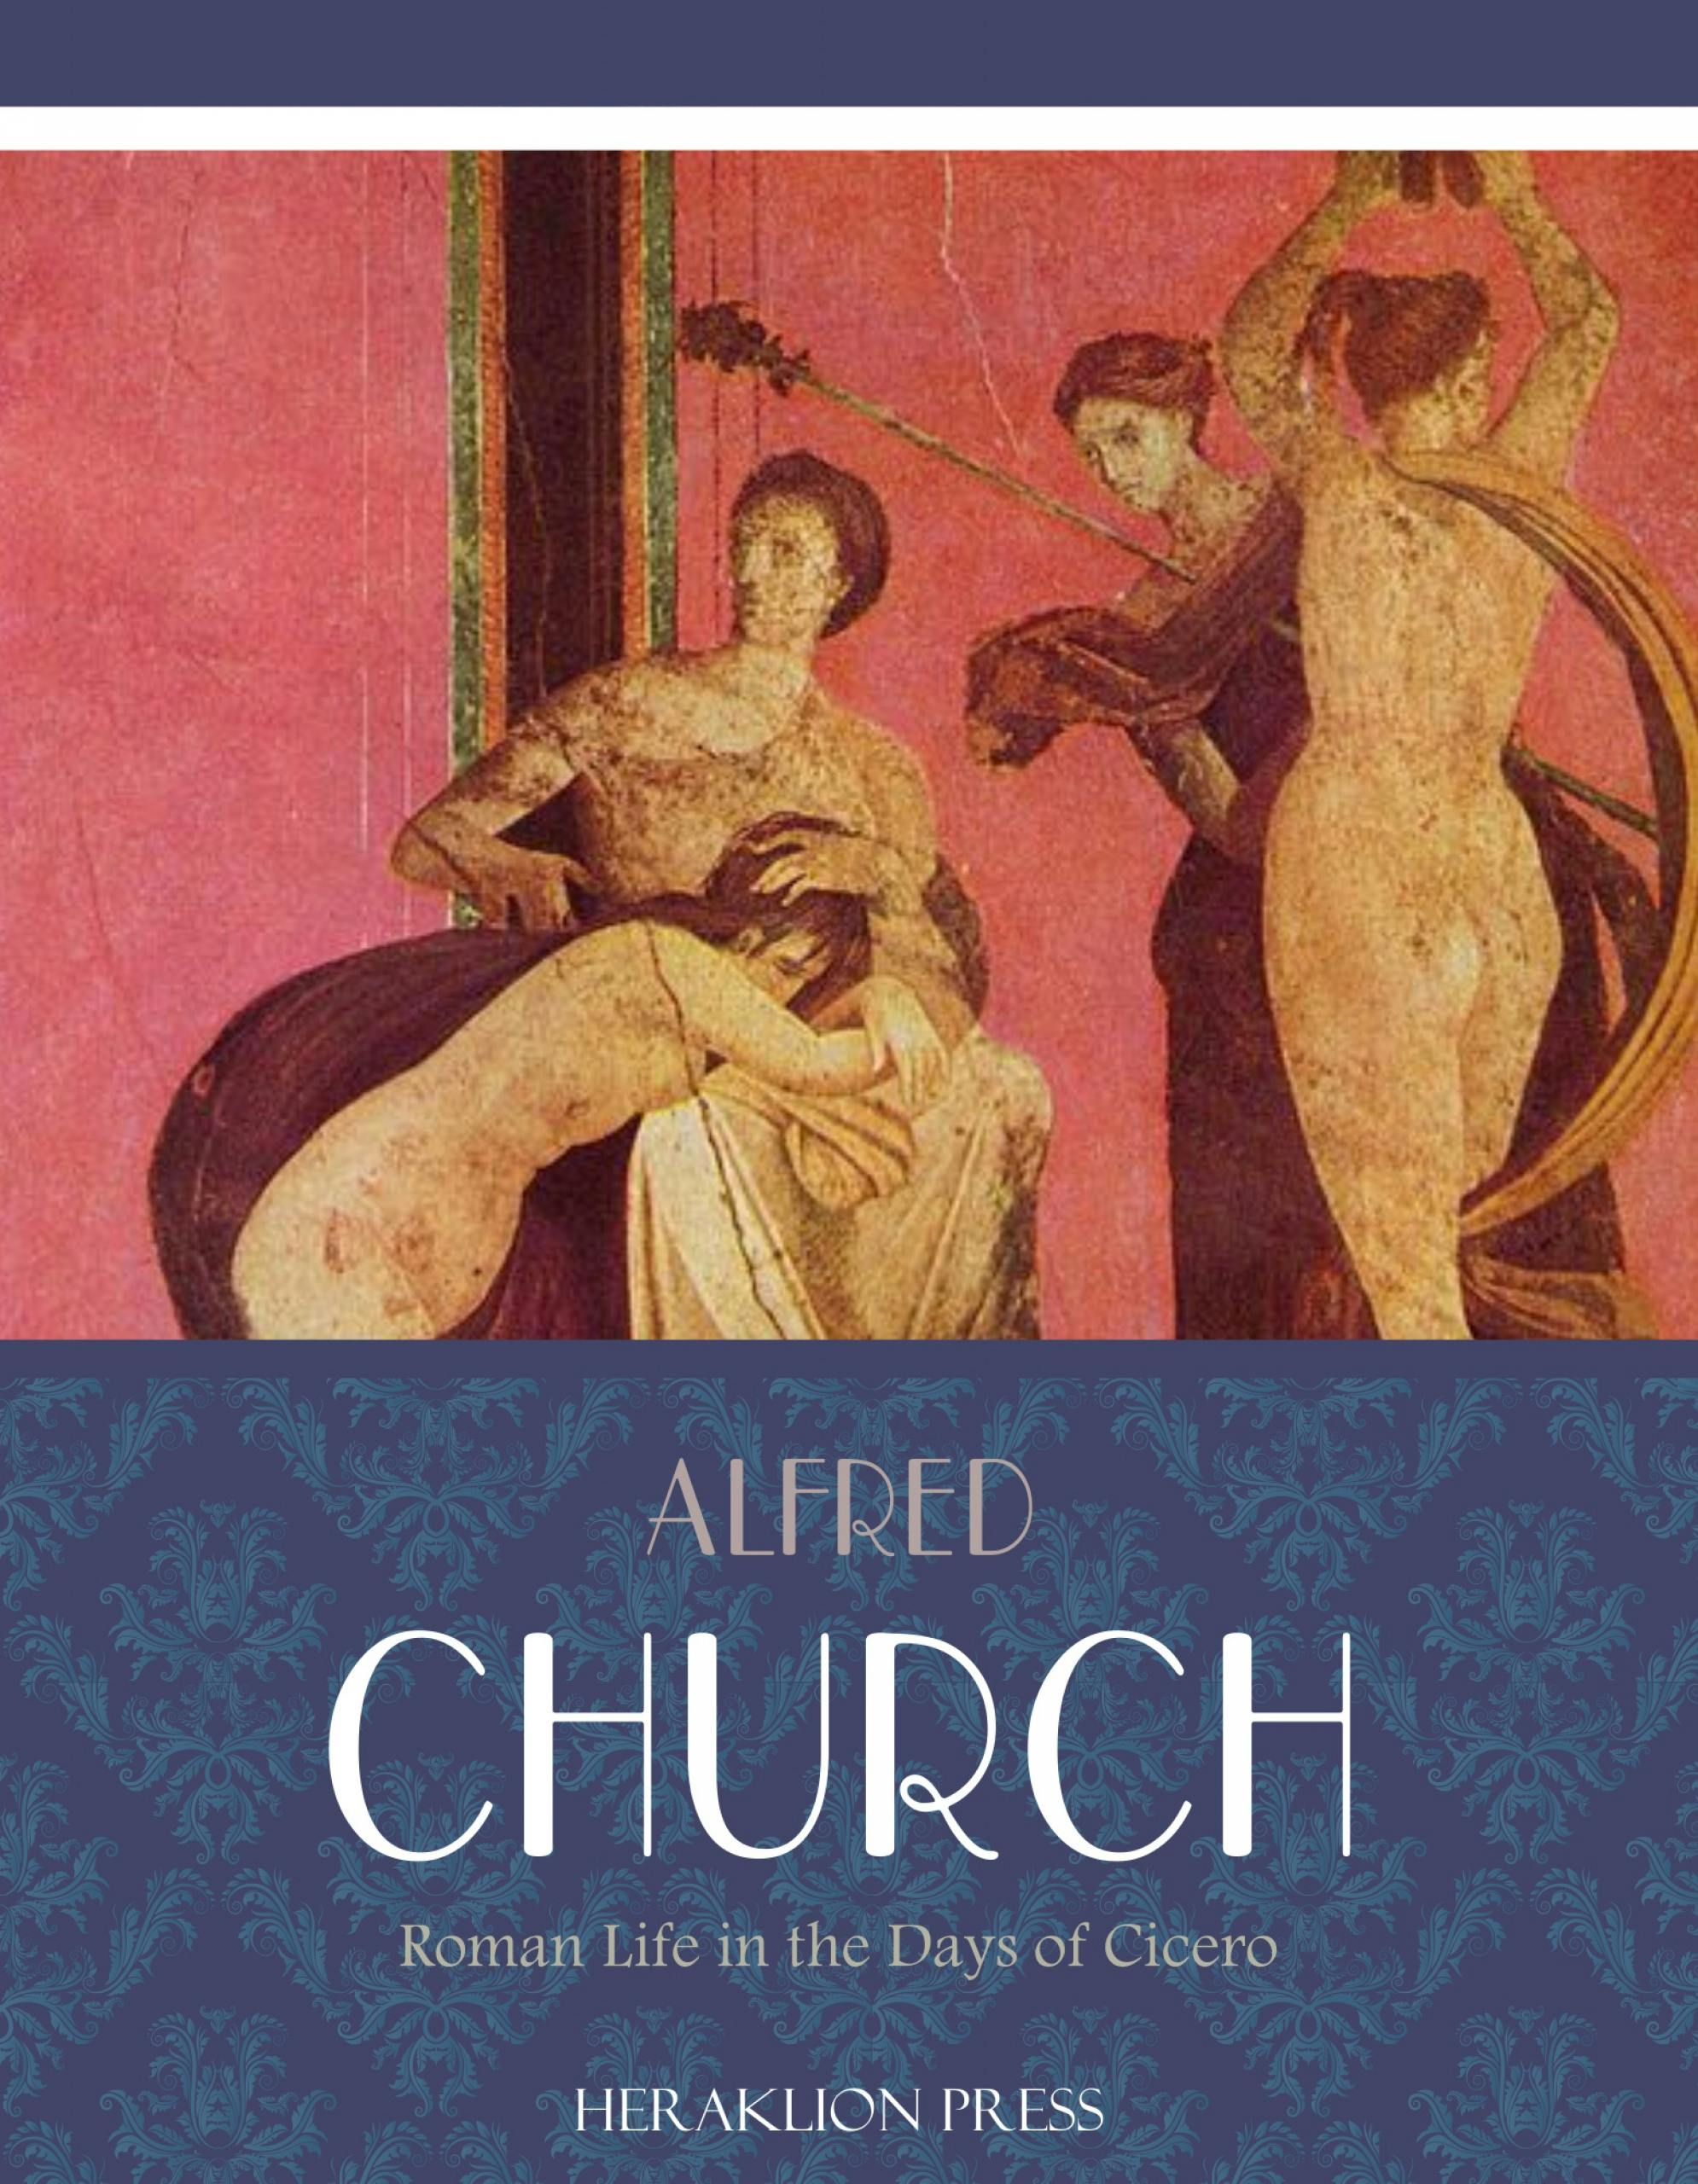 Roman Life in the Days of Cicero - Alfred Church